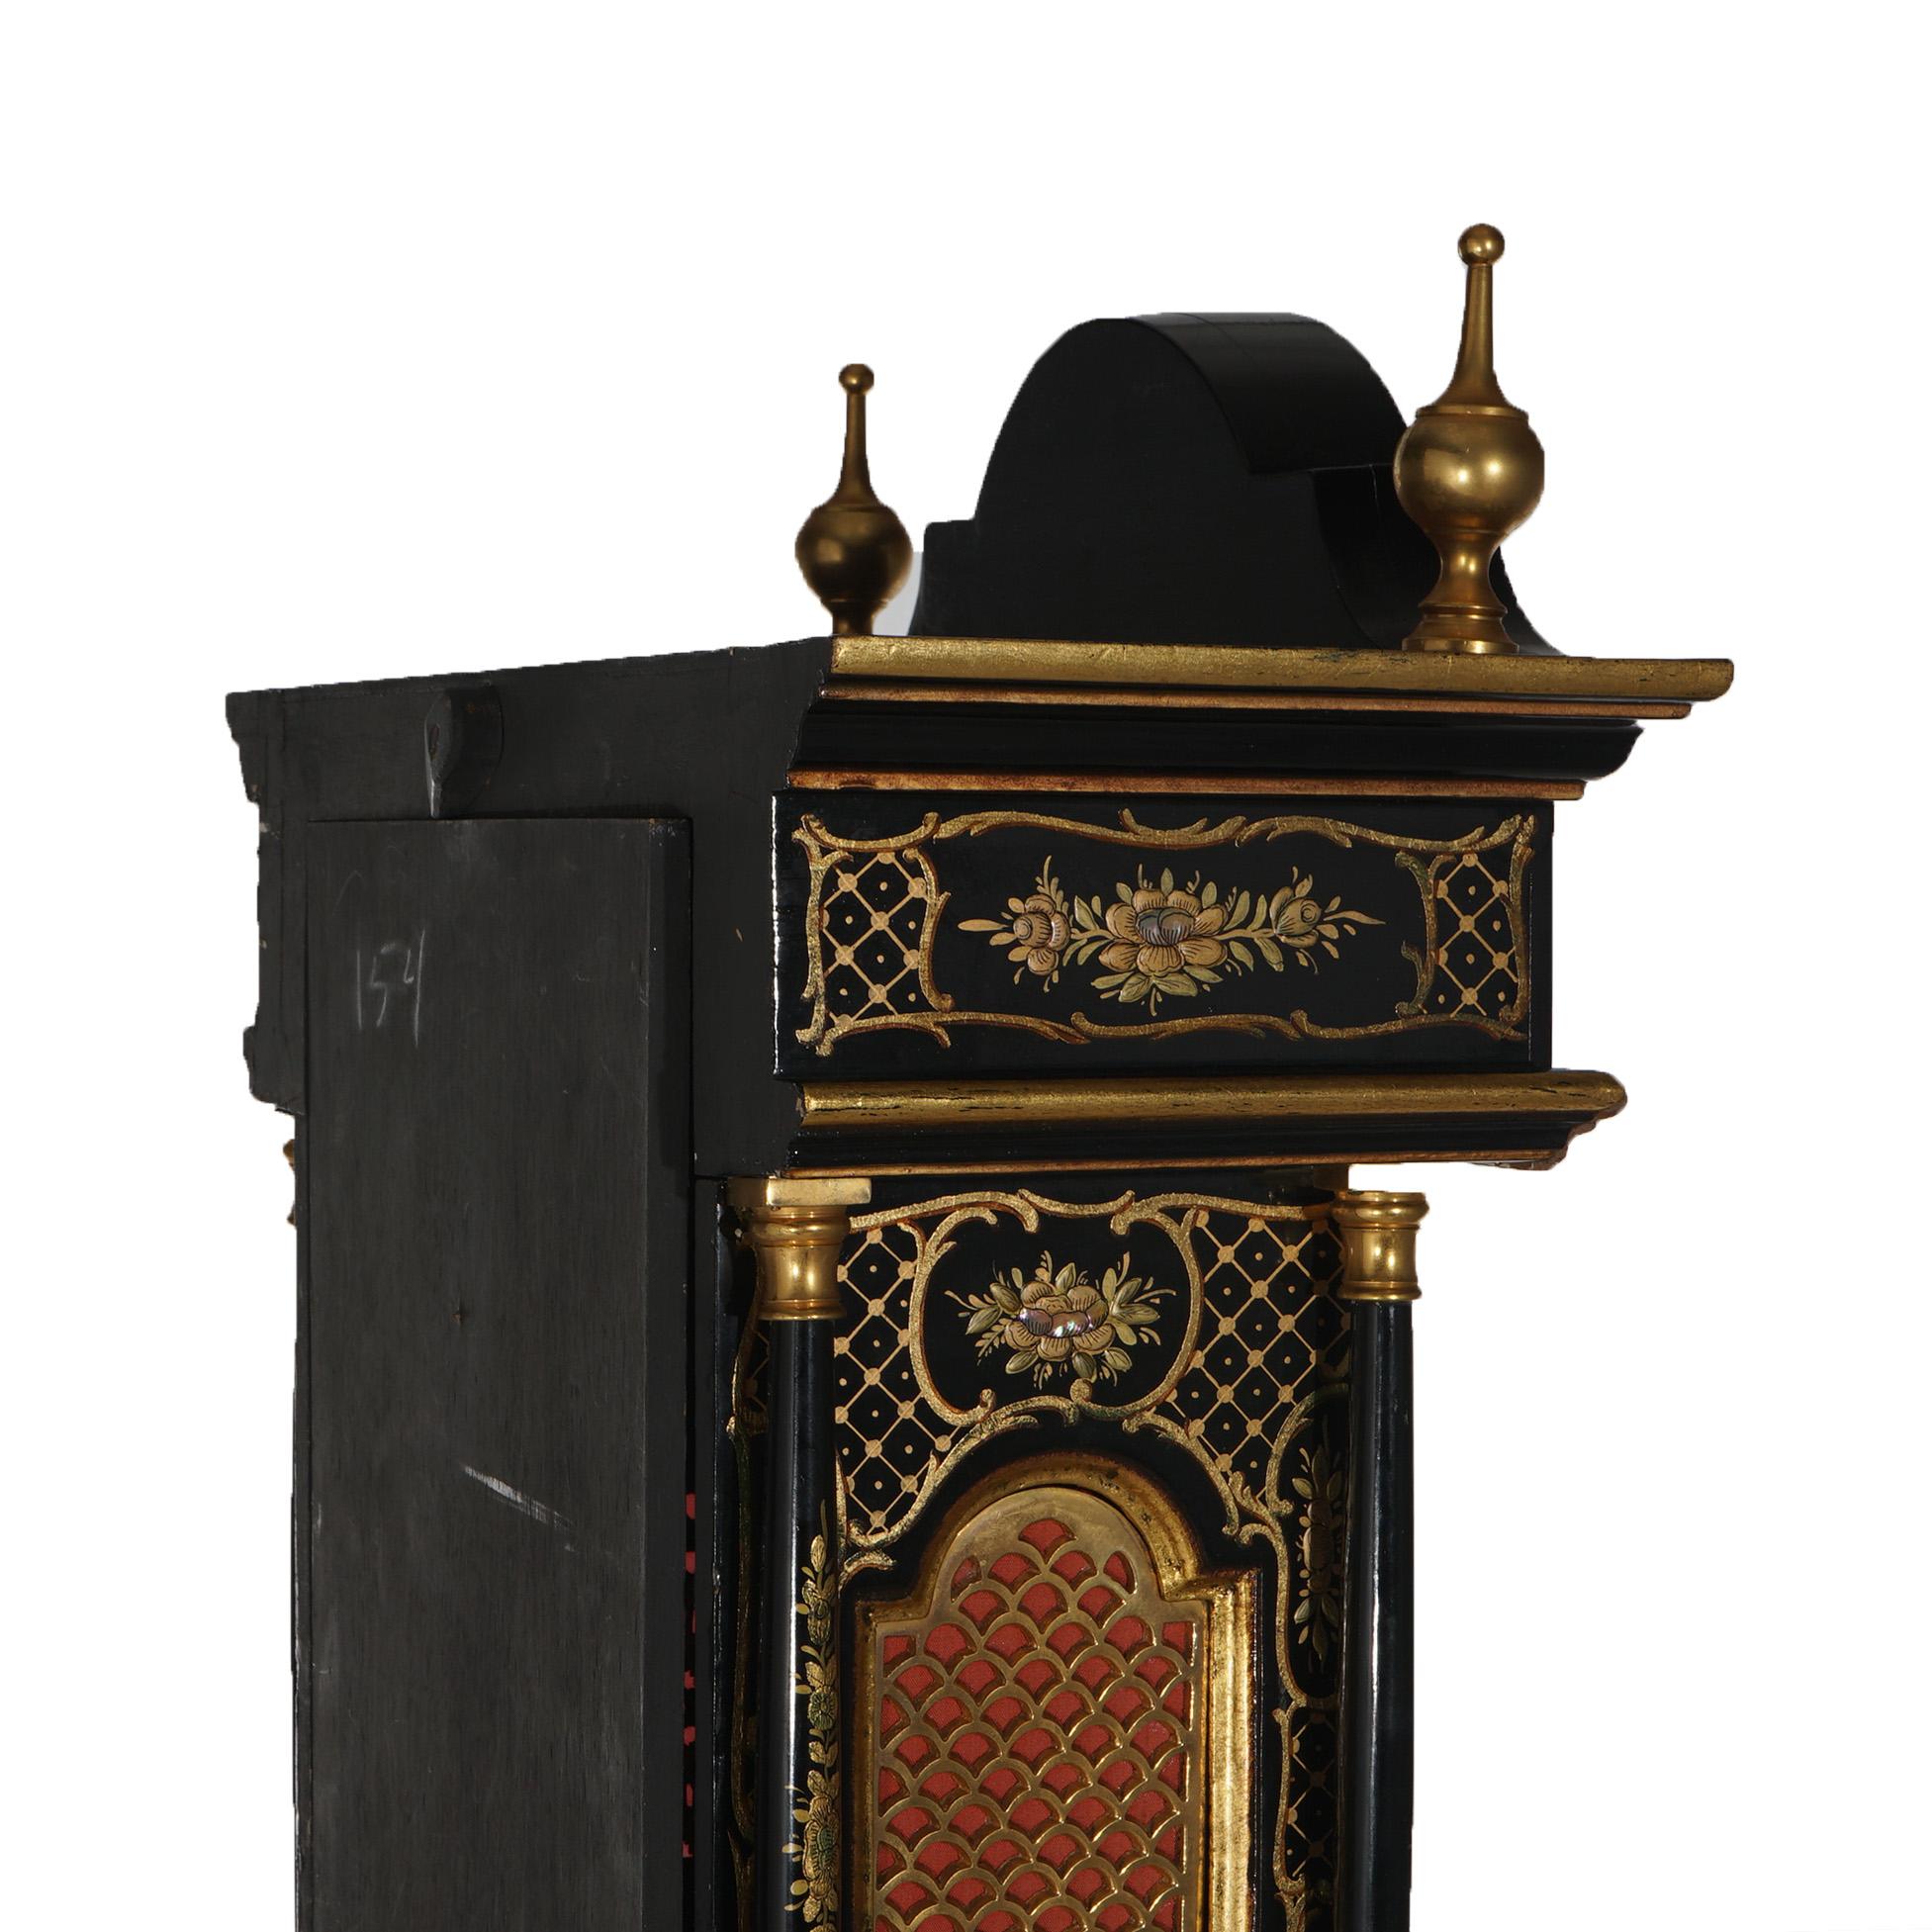 German Chinoiserie Gilt Decorated Black Lacquer Petite Tall Case Clock 20th C 4